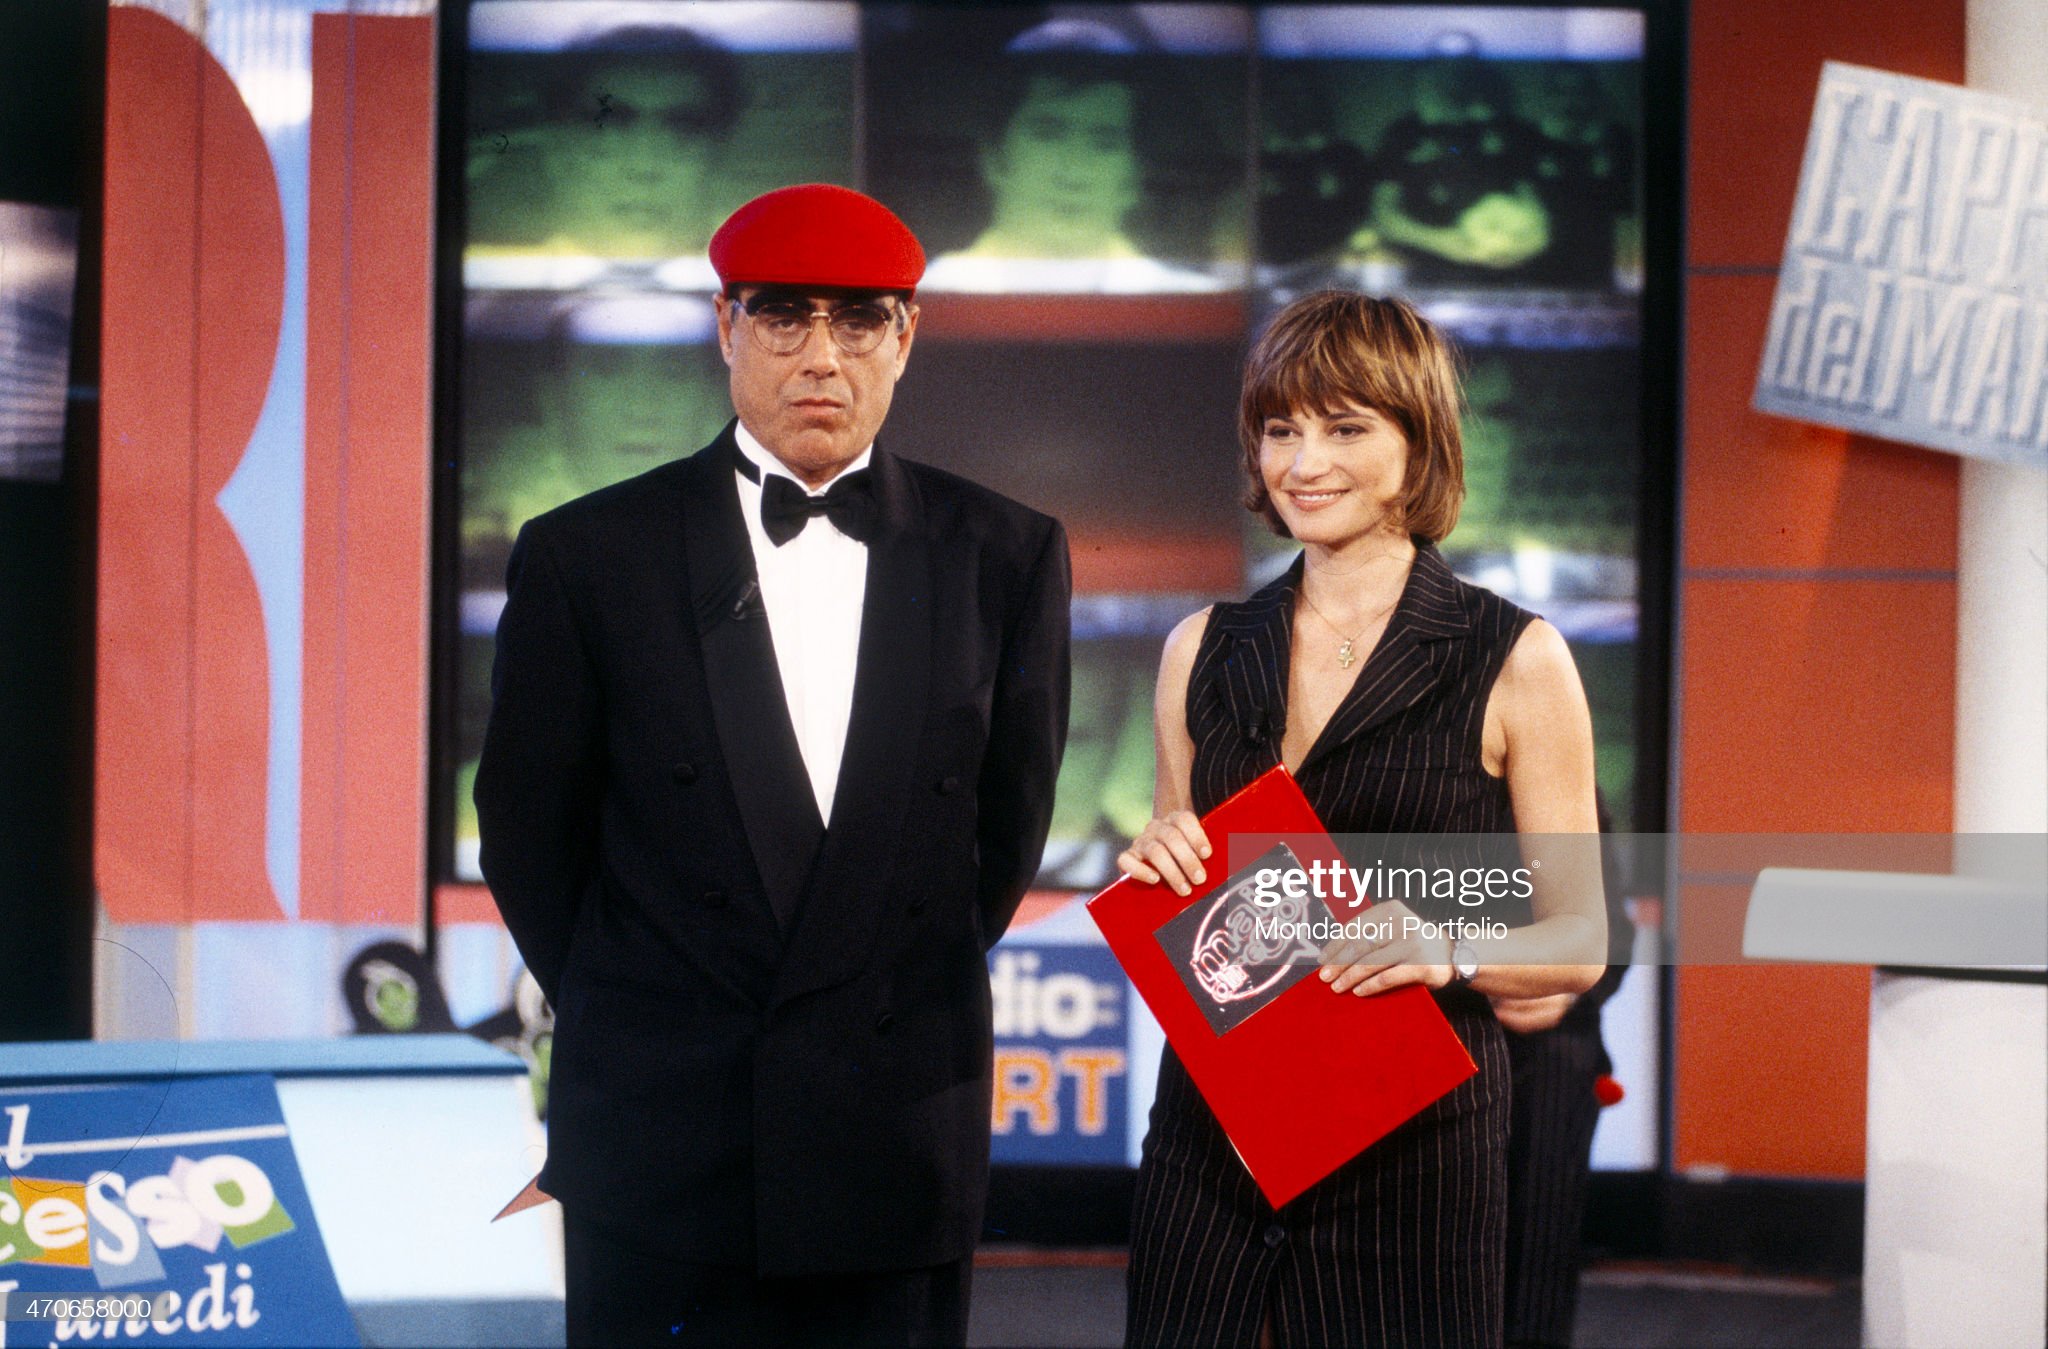 Comedian Teo Teocoli, in the guise of AC Milan supporter Peo Pericoli, conducts the sport/comical broadcasting ‘Mai dire Gol’, together with showgirl Simona Ventura; both listen silent the voiceover of the authors, the Gialappa's Band trio, in 1994 in Cologno Monzese, Milano, Italy. 